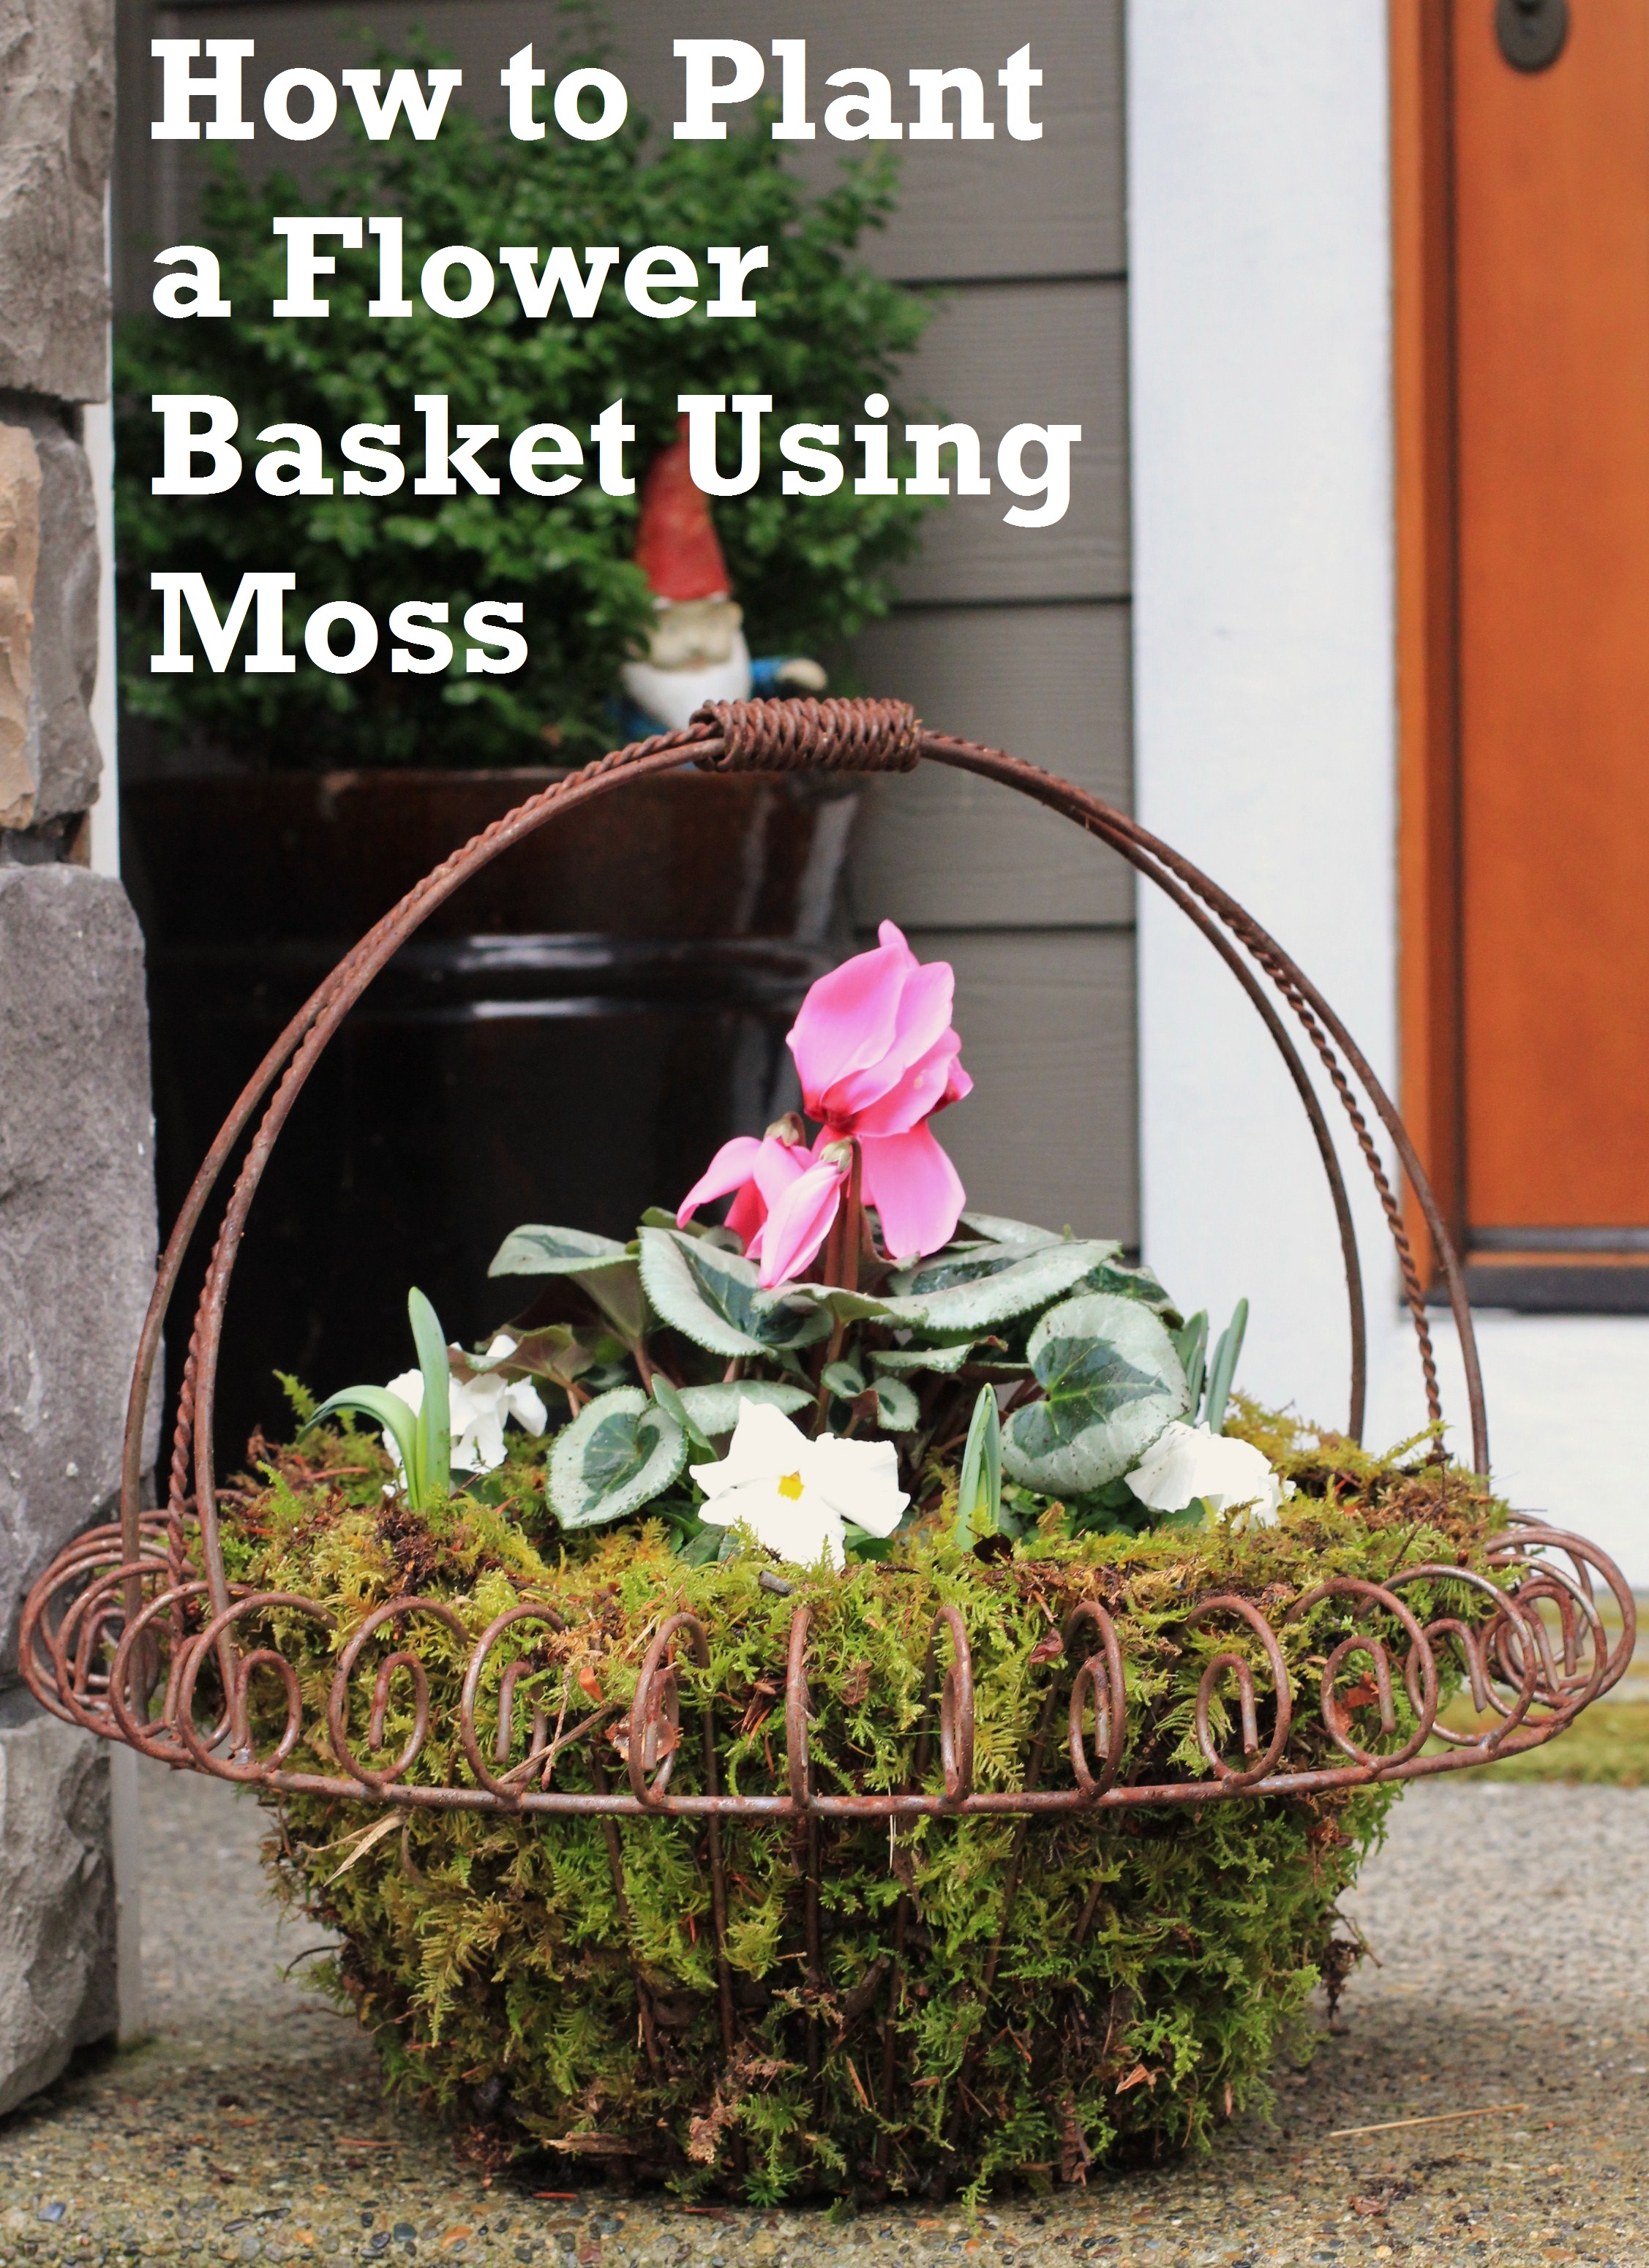 How to Plant a Flower Basket Using Moss